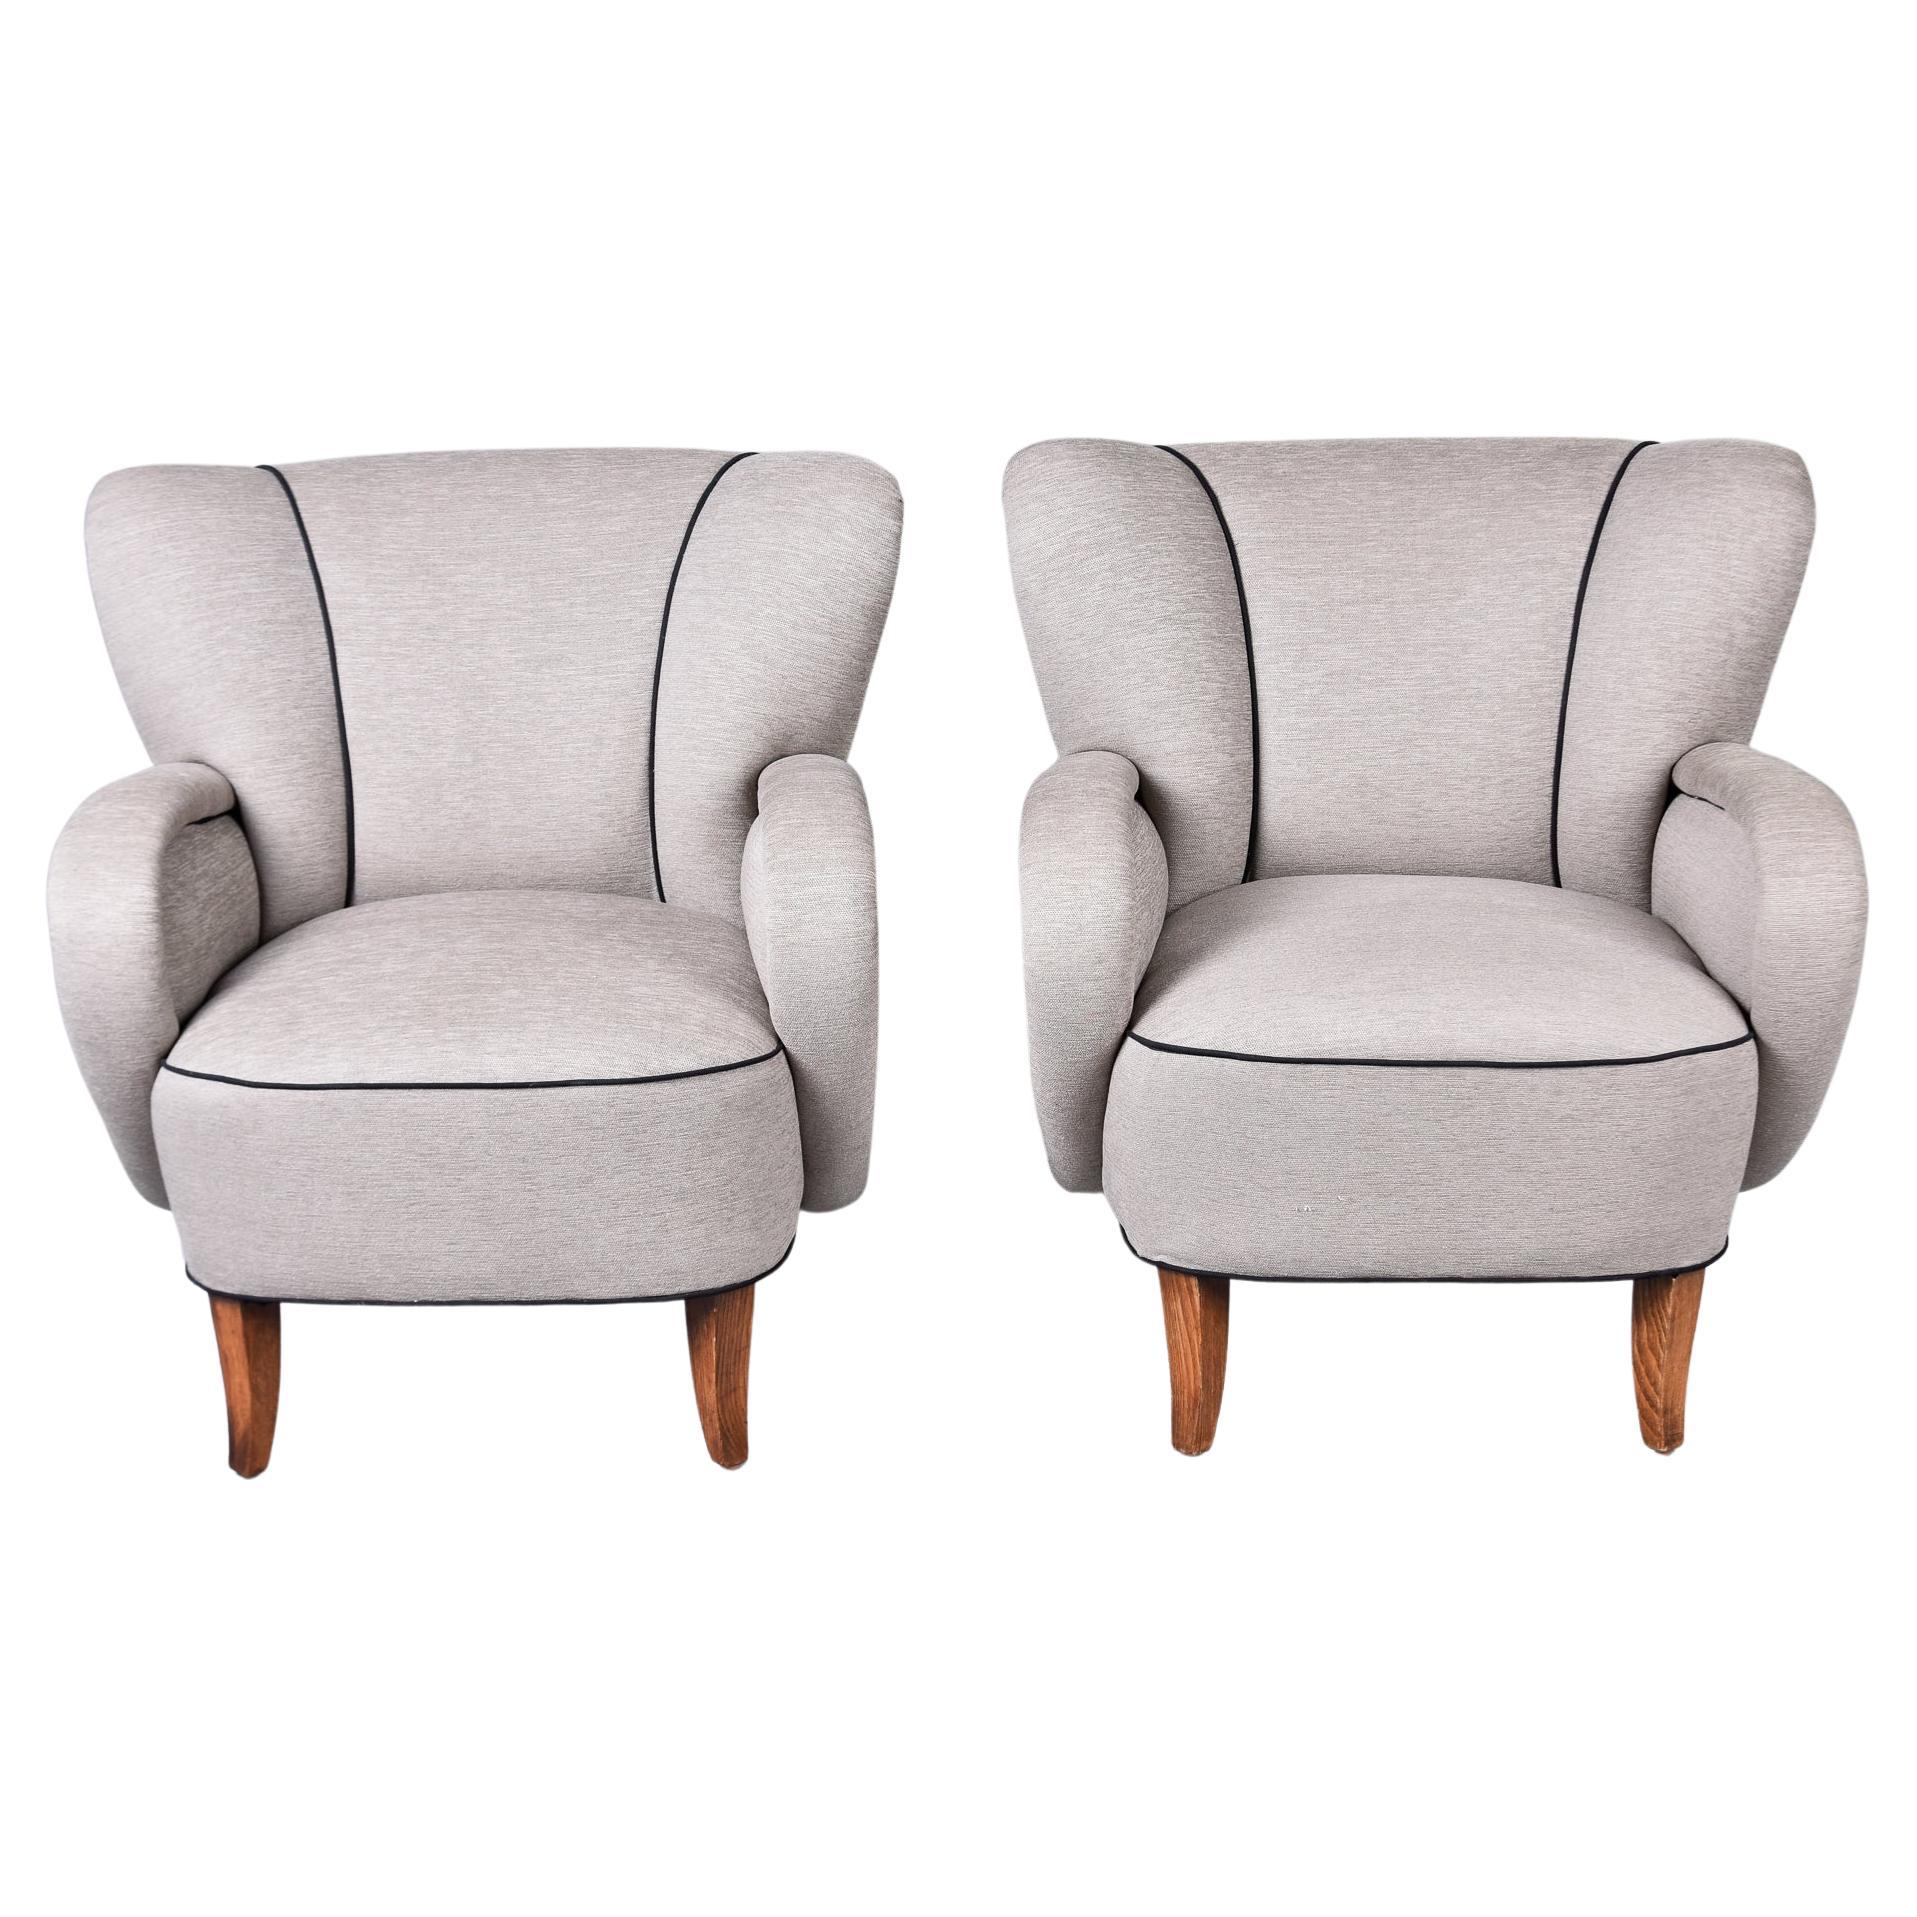 Pair Vintage Italian Channel Back Chairs with New Upholstery For Sale